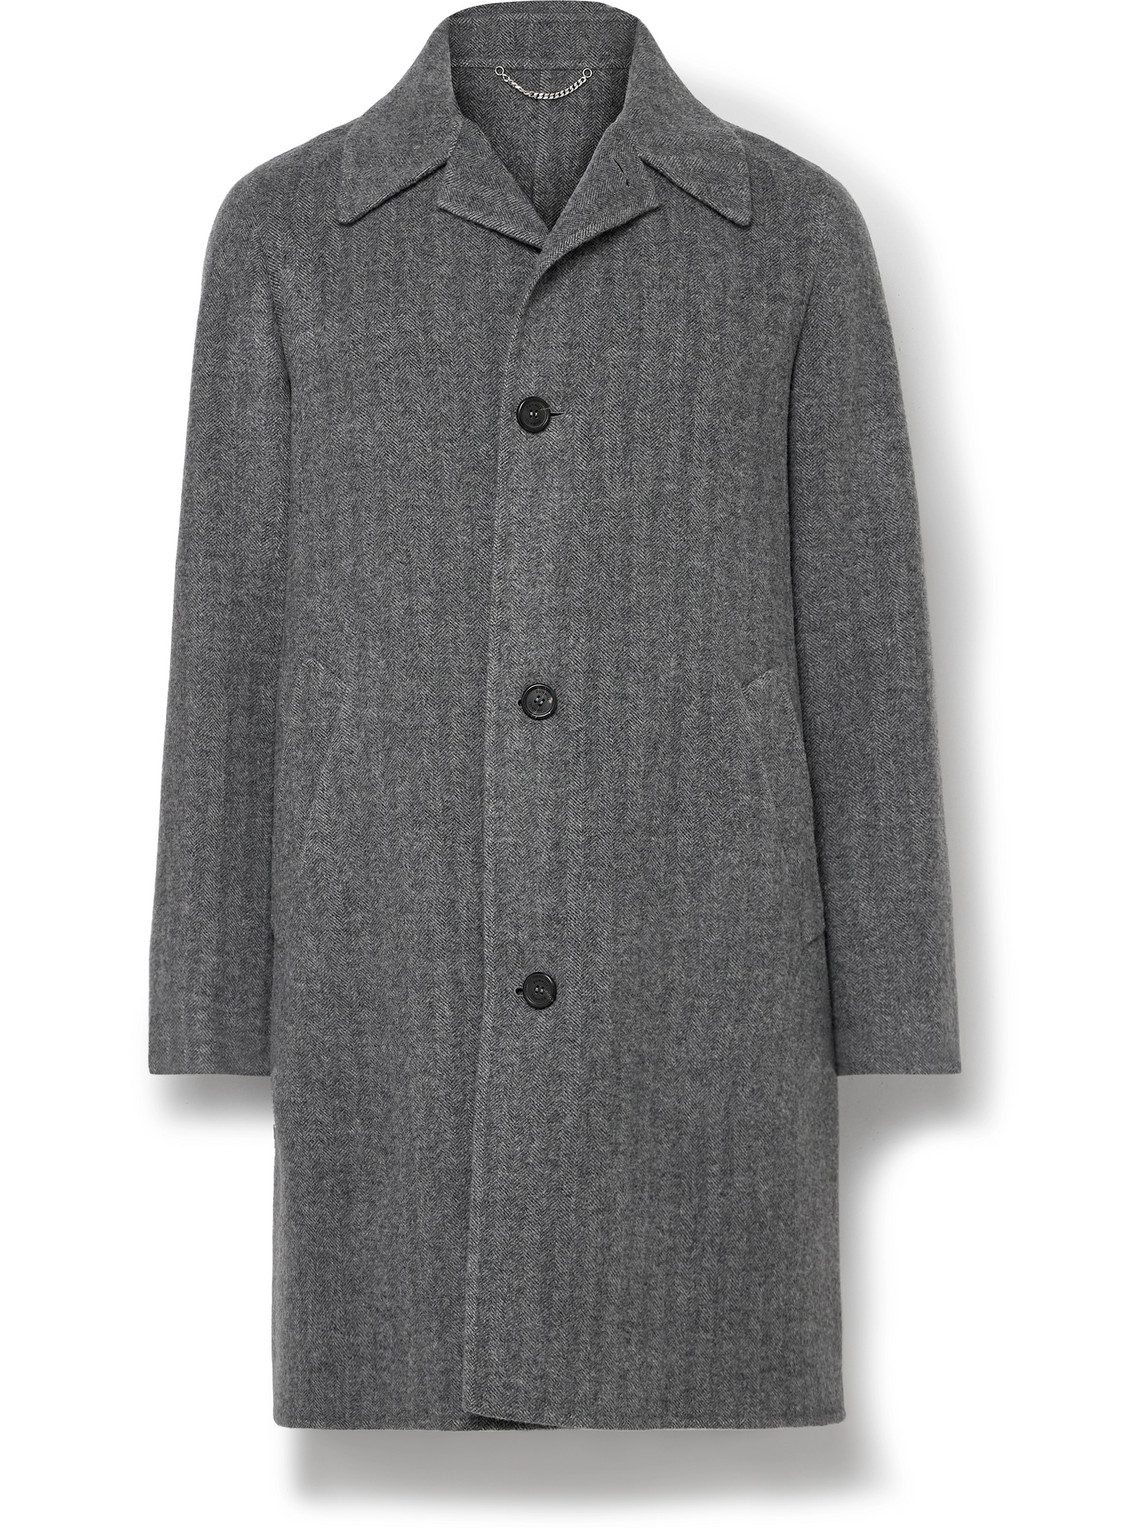 Dunhill - Unstructured Double-Faced Herringbone Wool Car Coat - Men - Gray - IT 50 von Dunhill